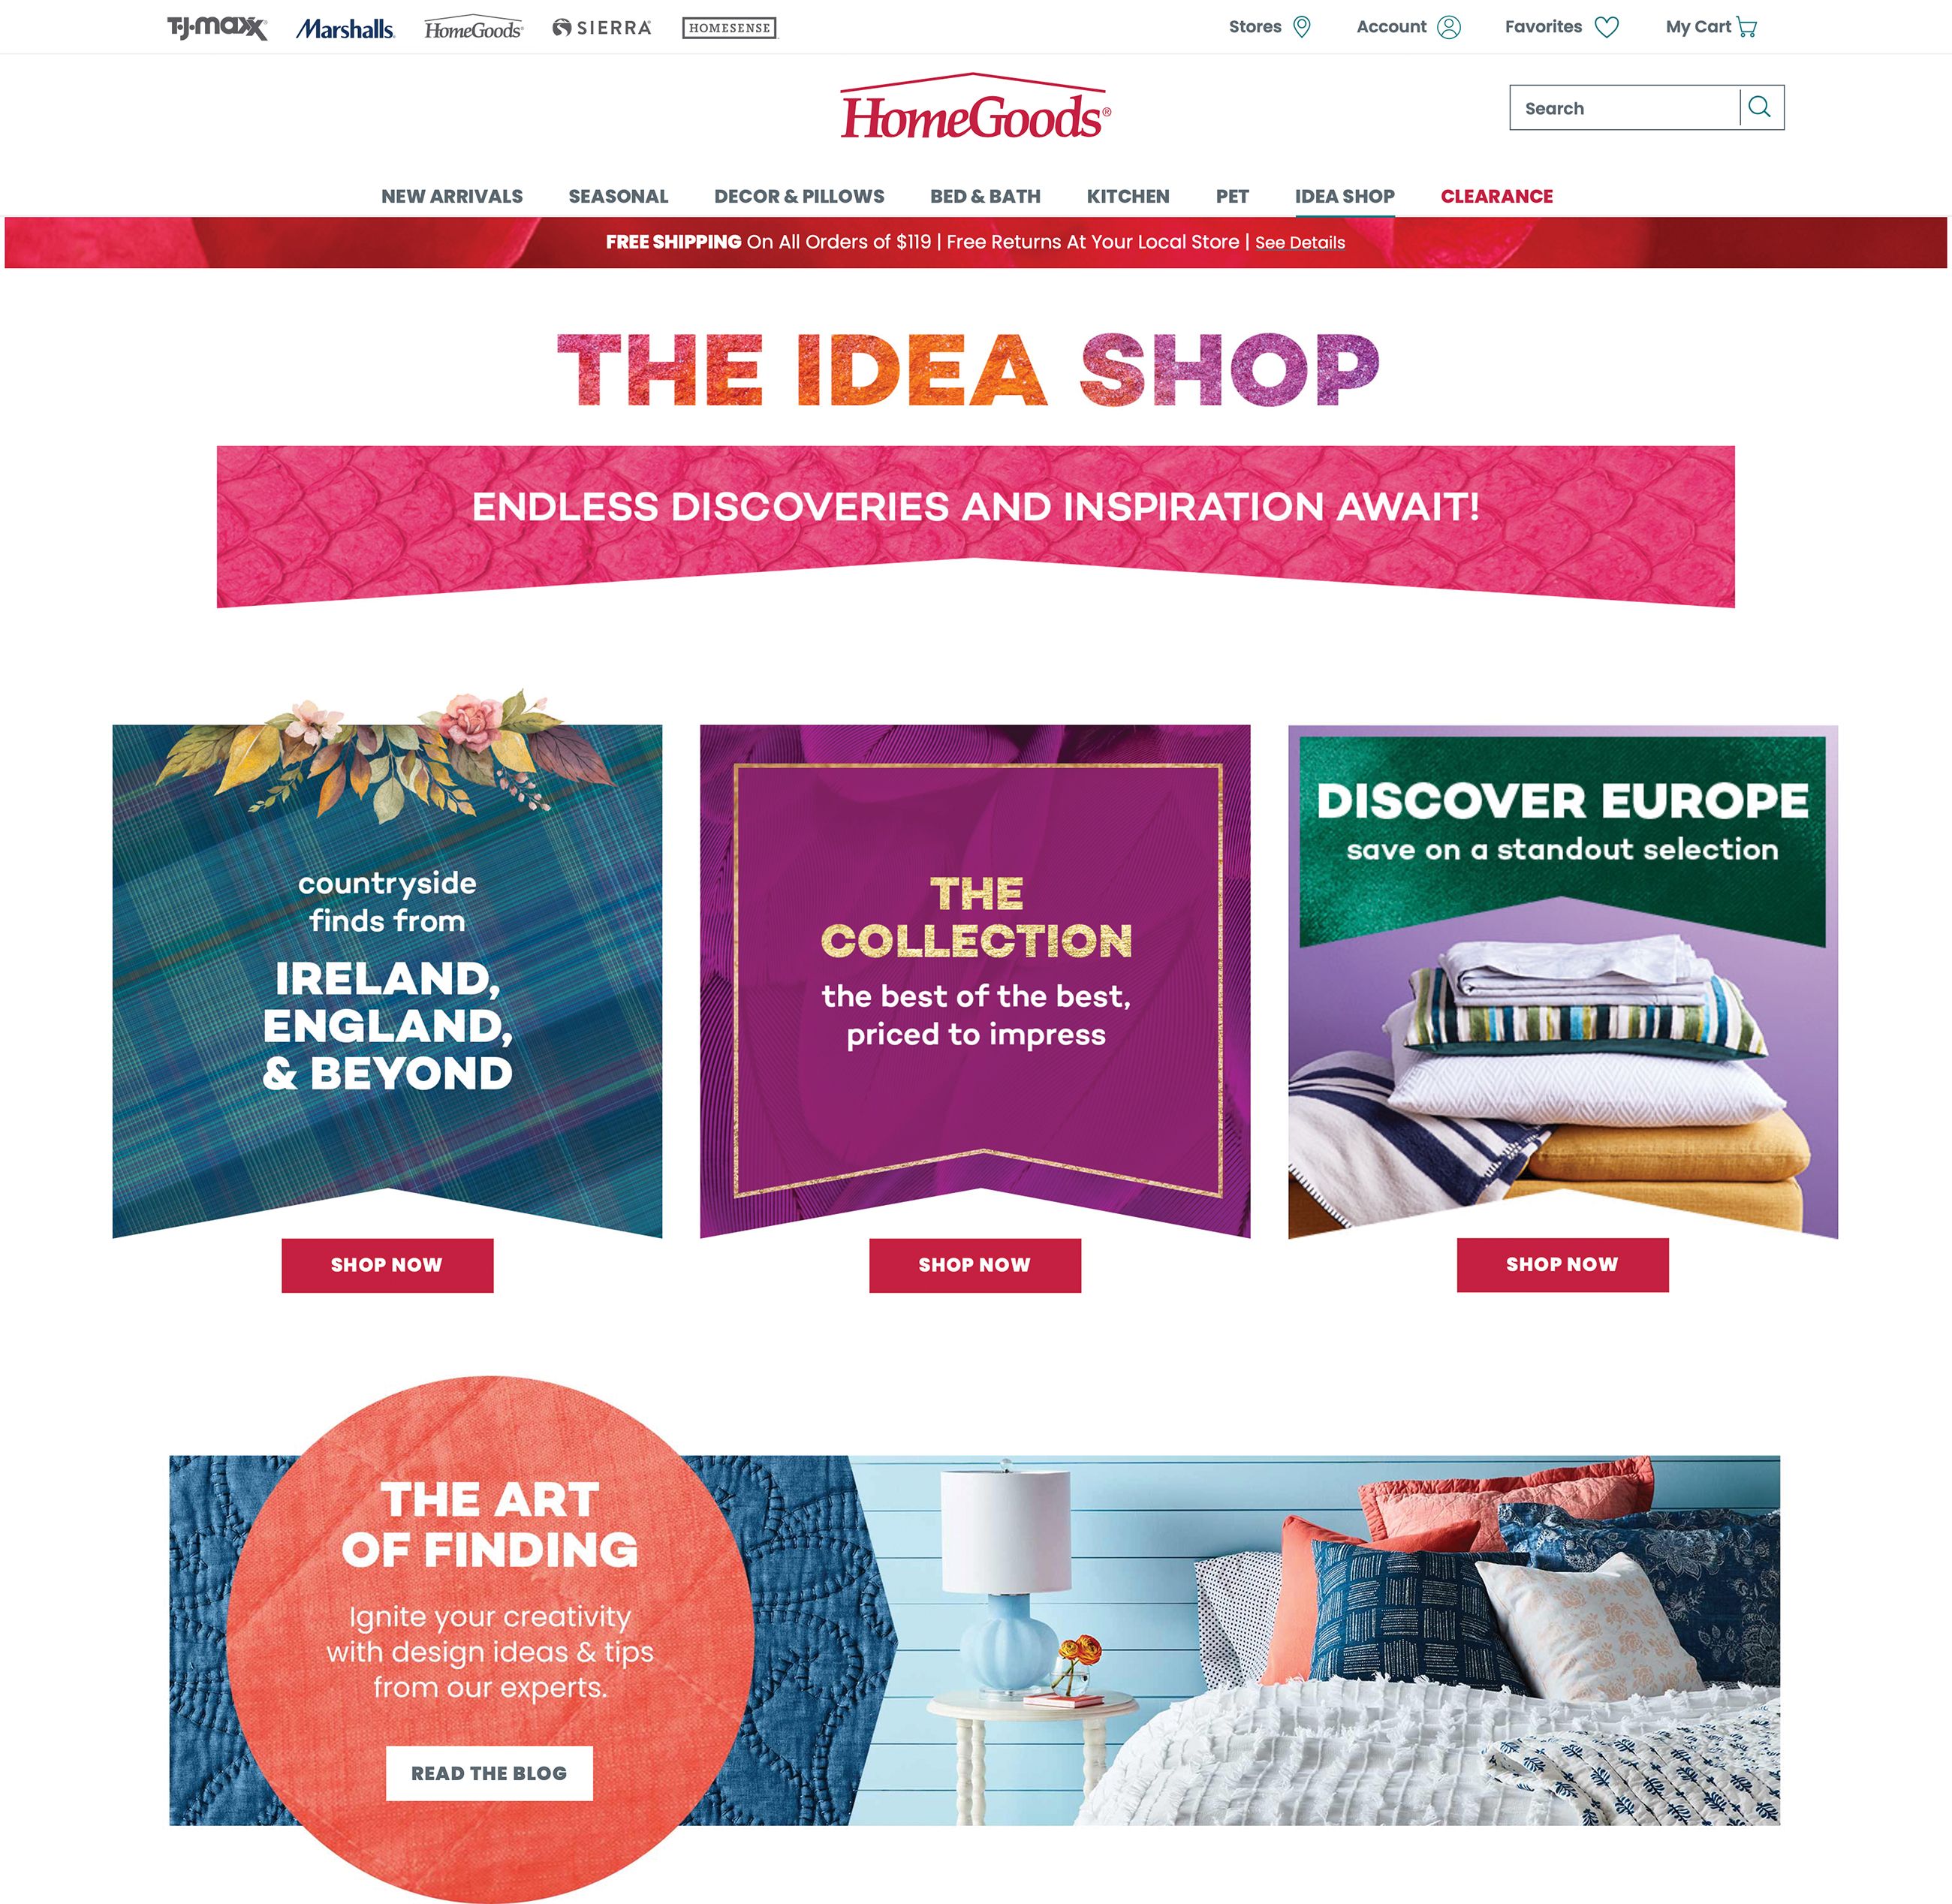 HomeGoods launches online store just in time for the holidays